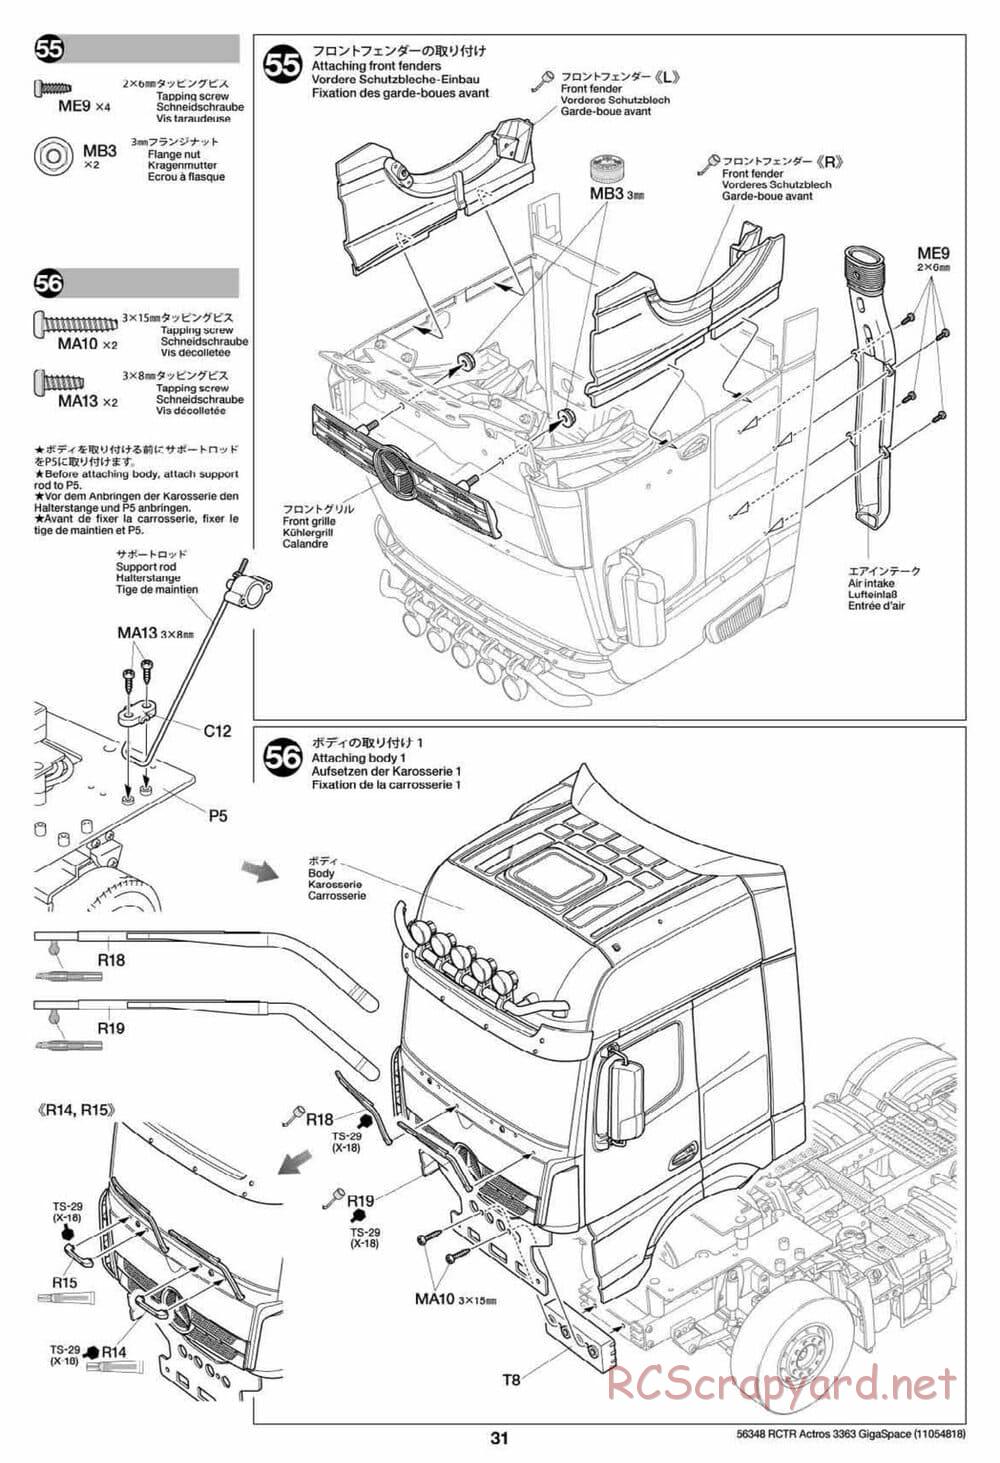 Tamiya - Mercedes-Benz Actros 3363 6x4 GigaSpace Tractor Truck Chassis - Manual - Page 31